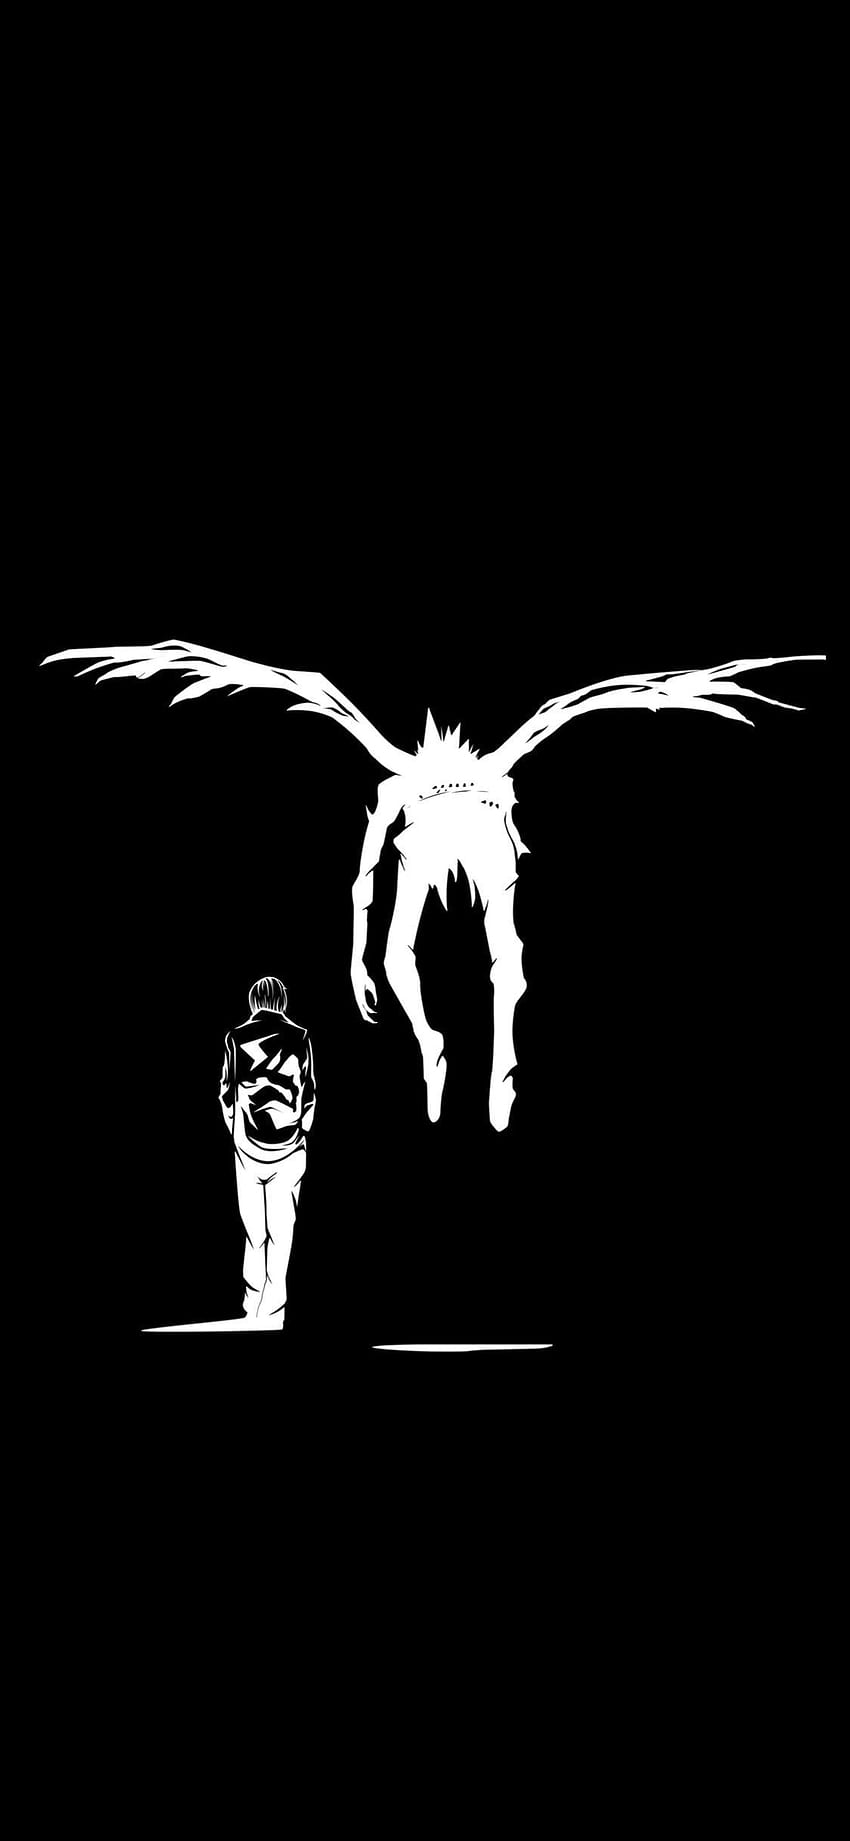 Ponsel Death Note, Minimalis Death Note wallpaper ponsel HD